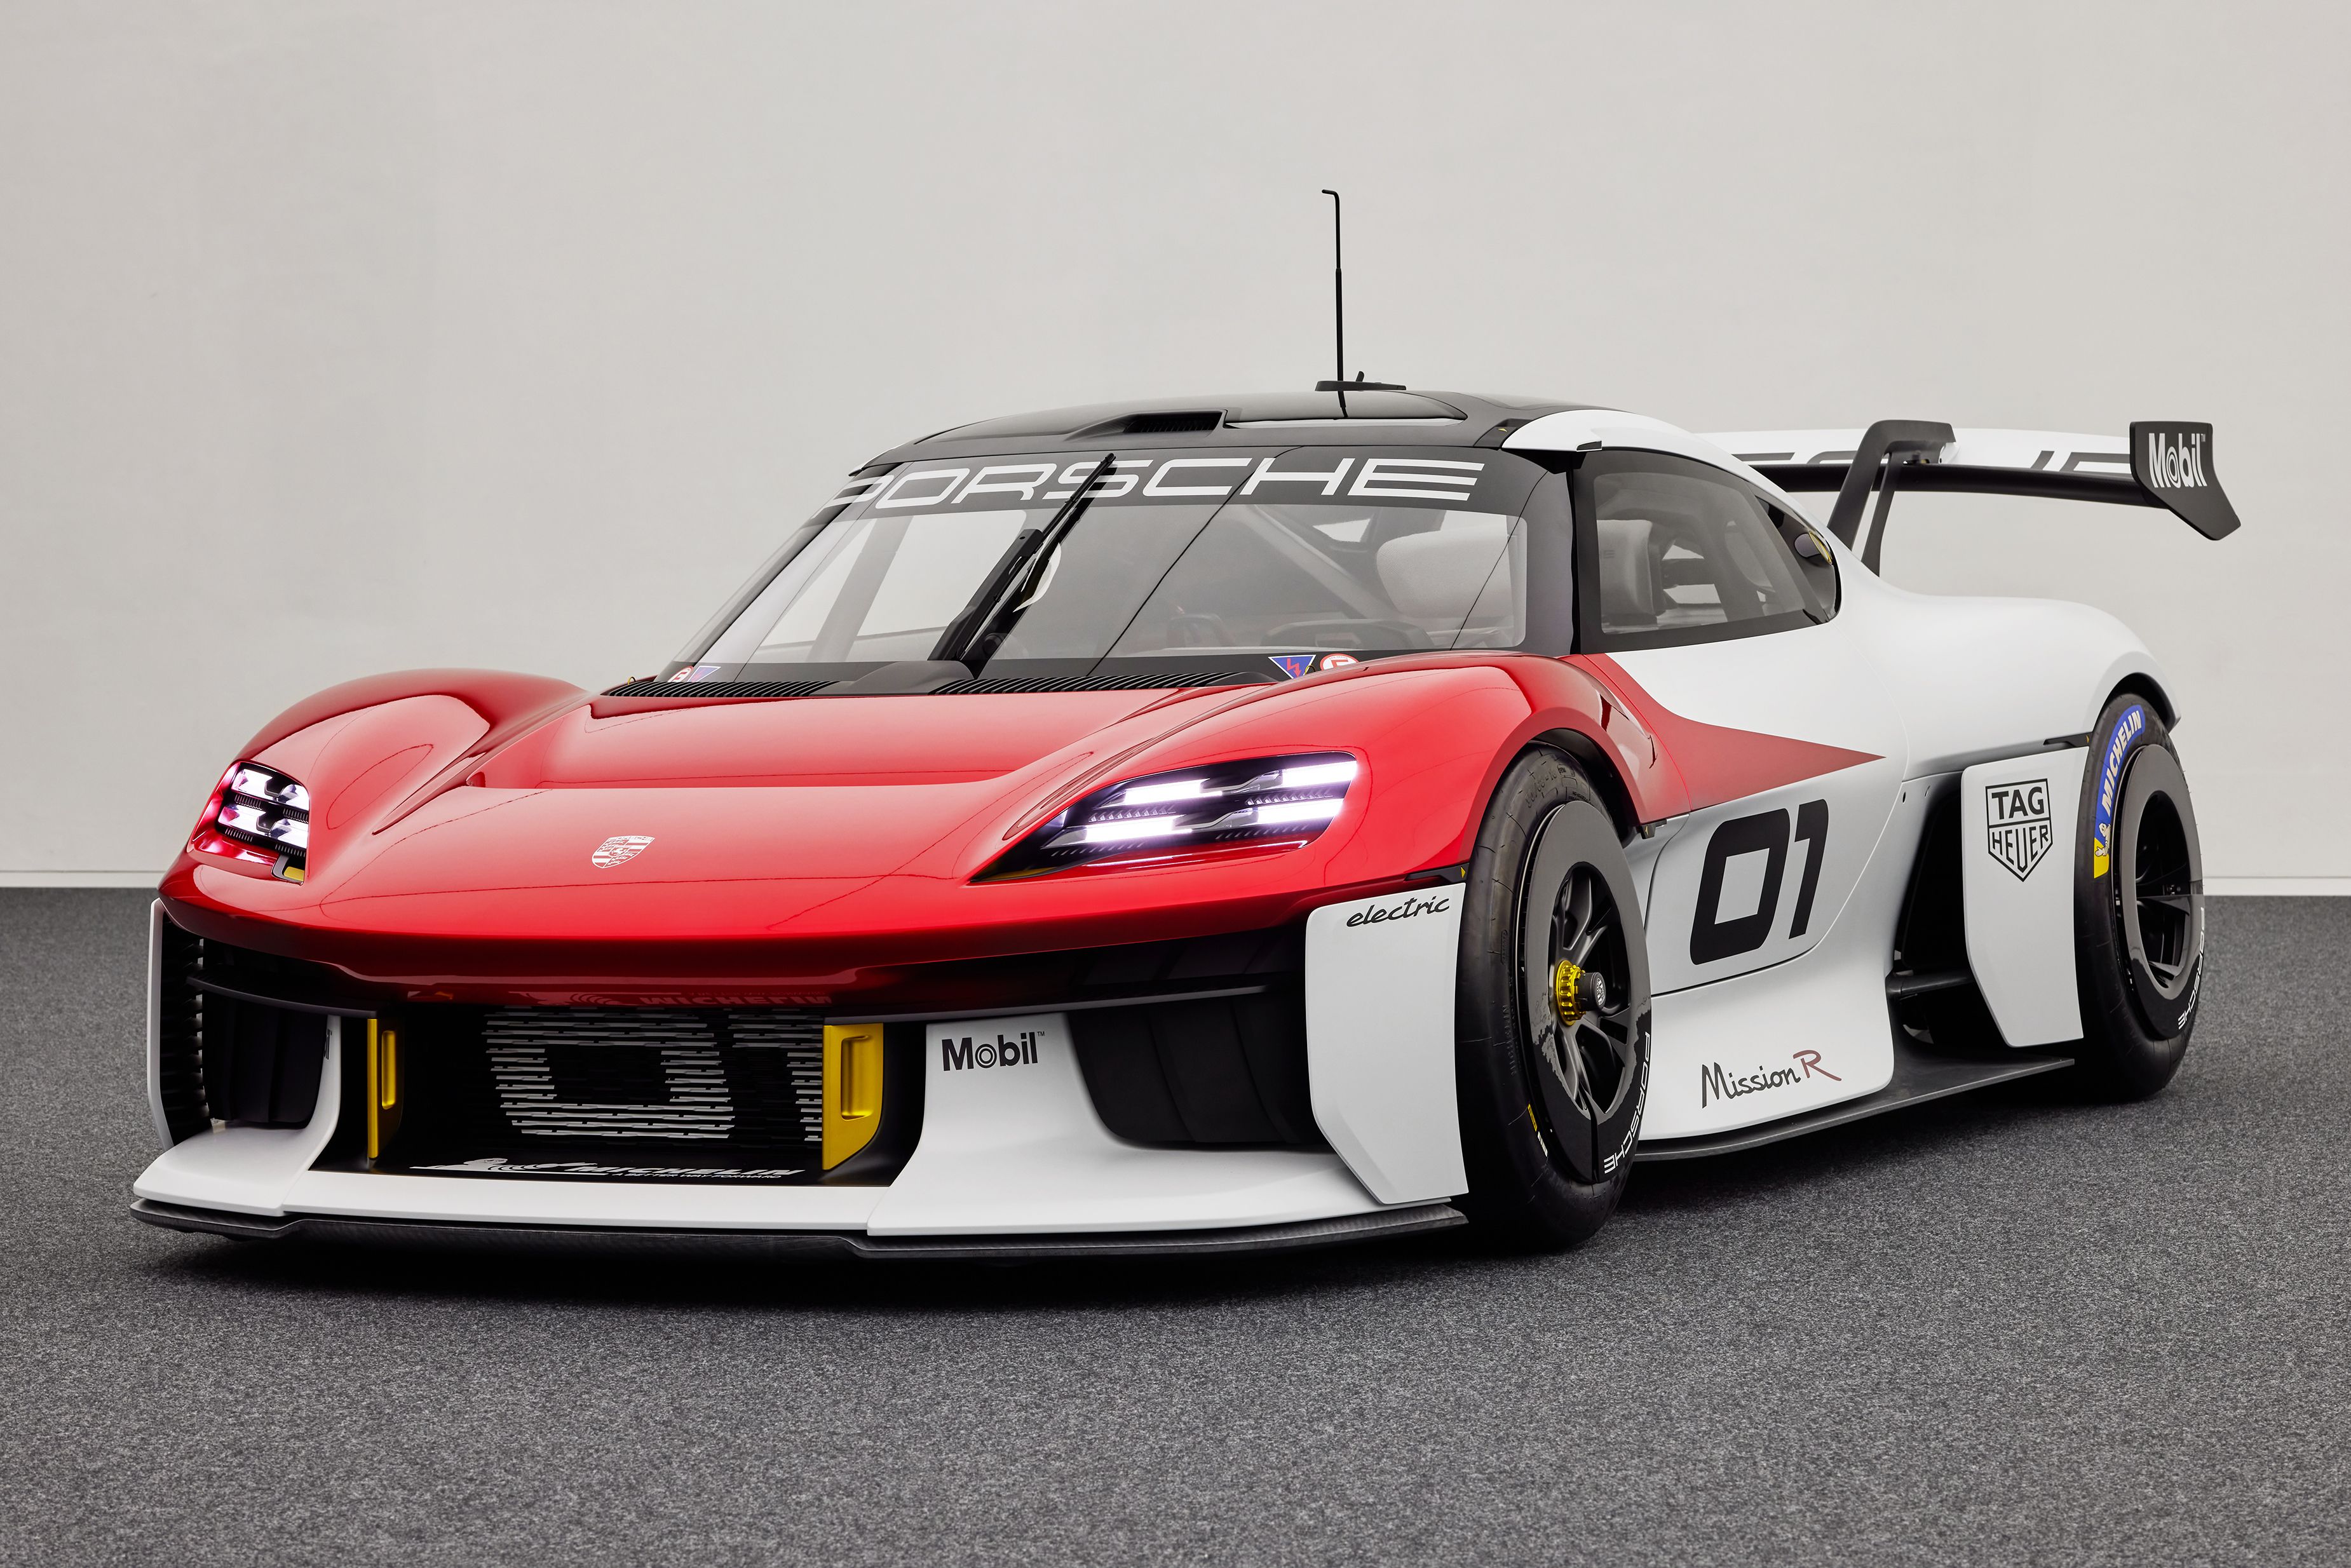 Porsche Mission R: The Future of Porsche GT Cars, Electric with